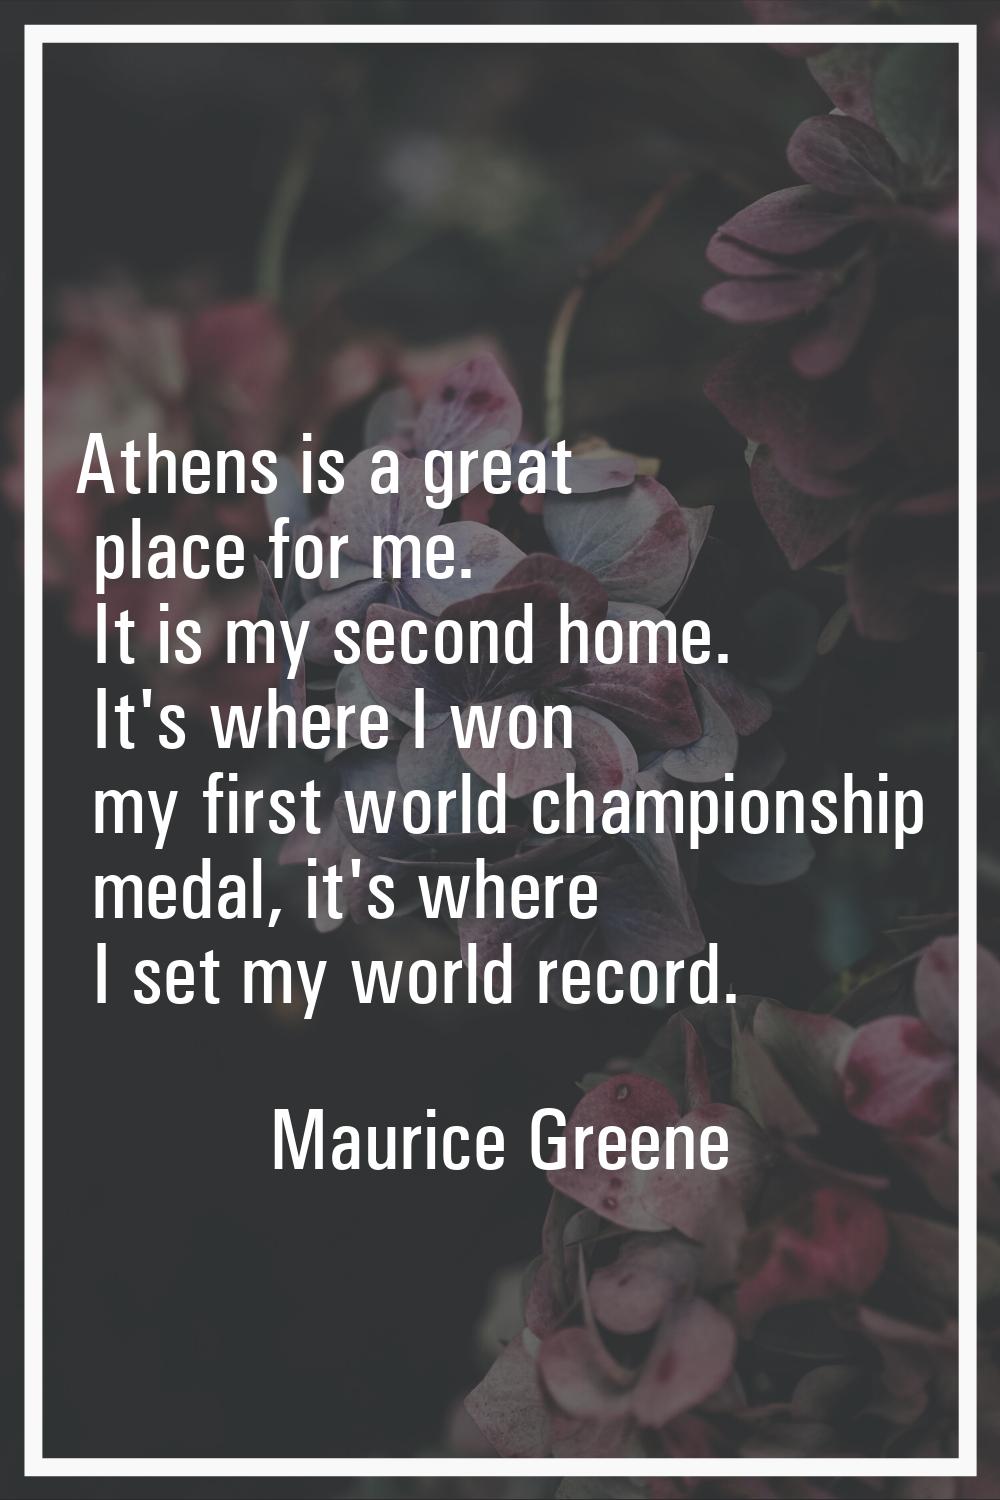 Athens is a great place for me. It is my second home. It's where I won my first world championship 